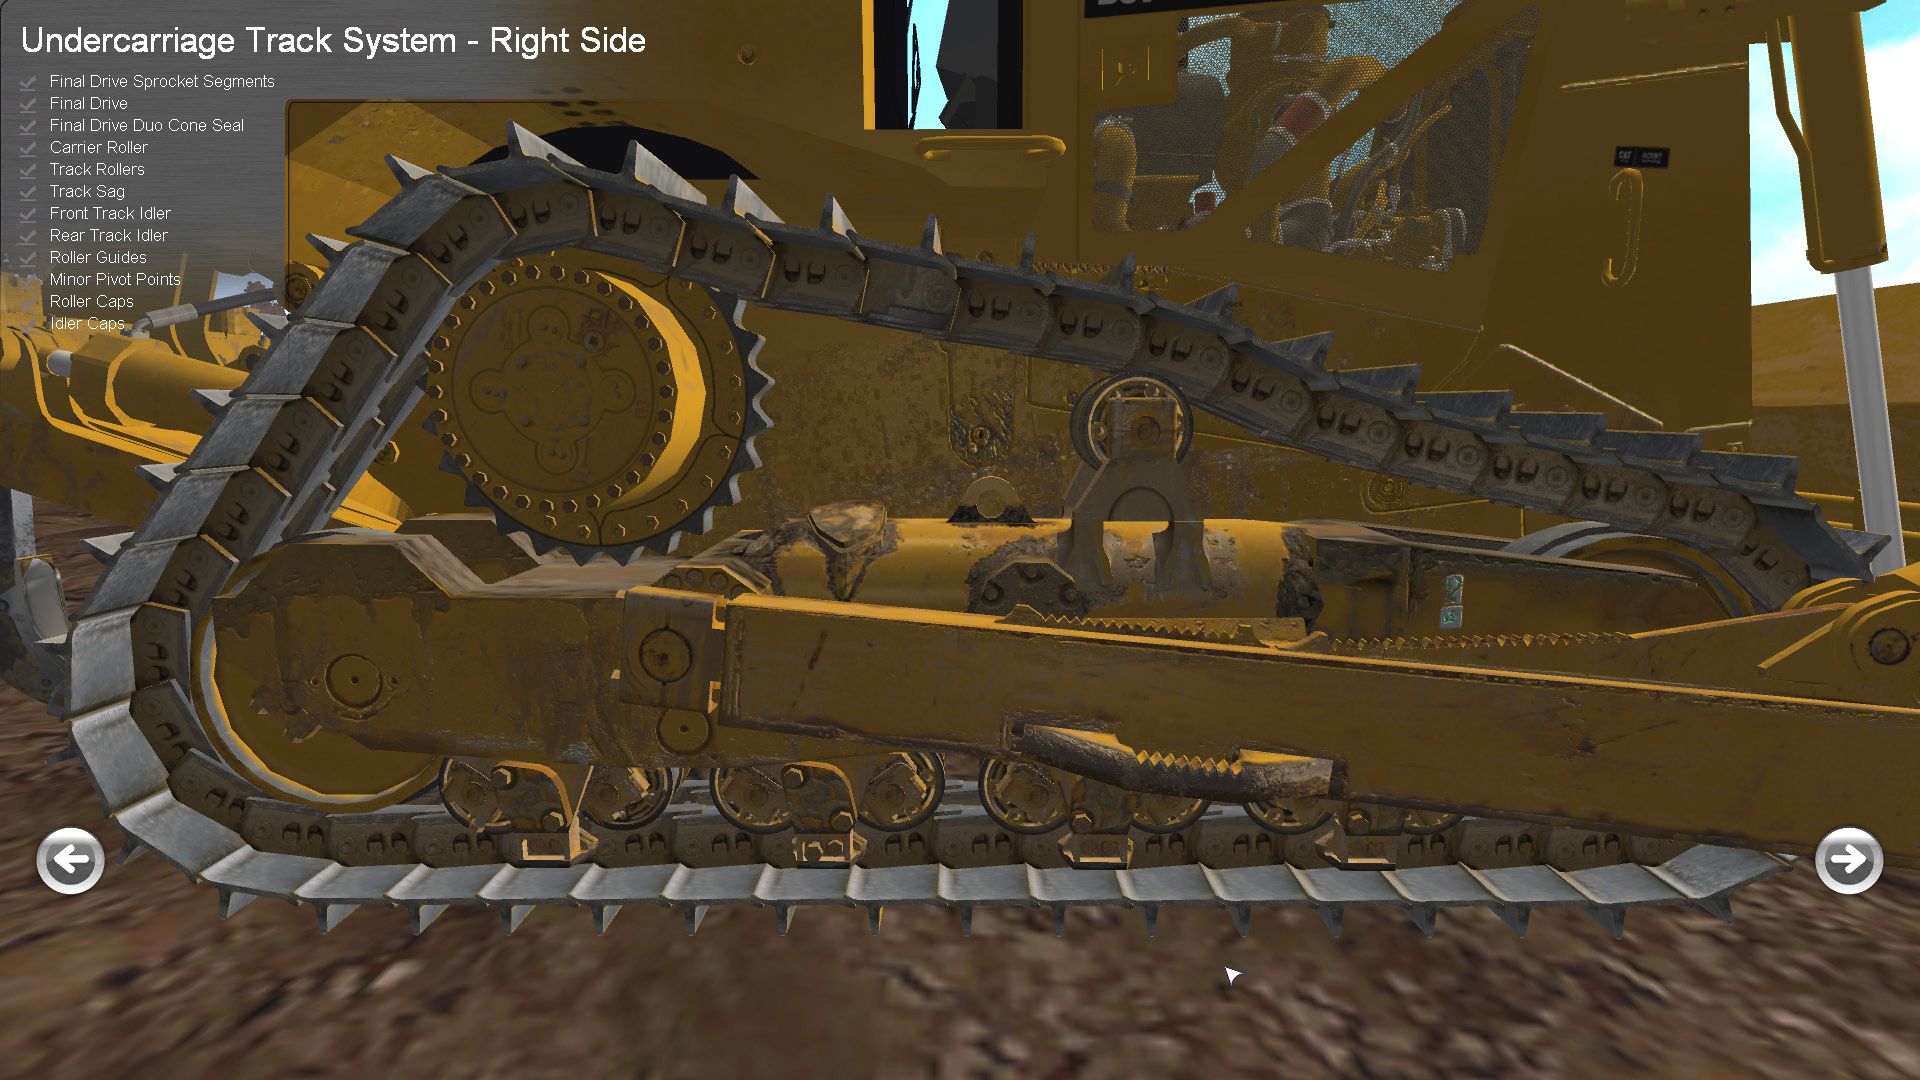 Cat offers simulation software to train heavy equipment operators